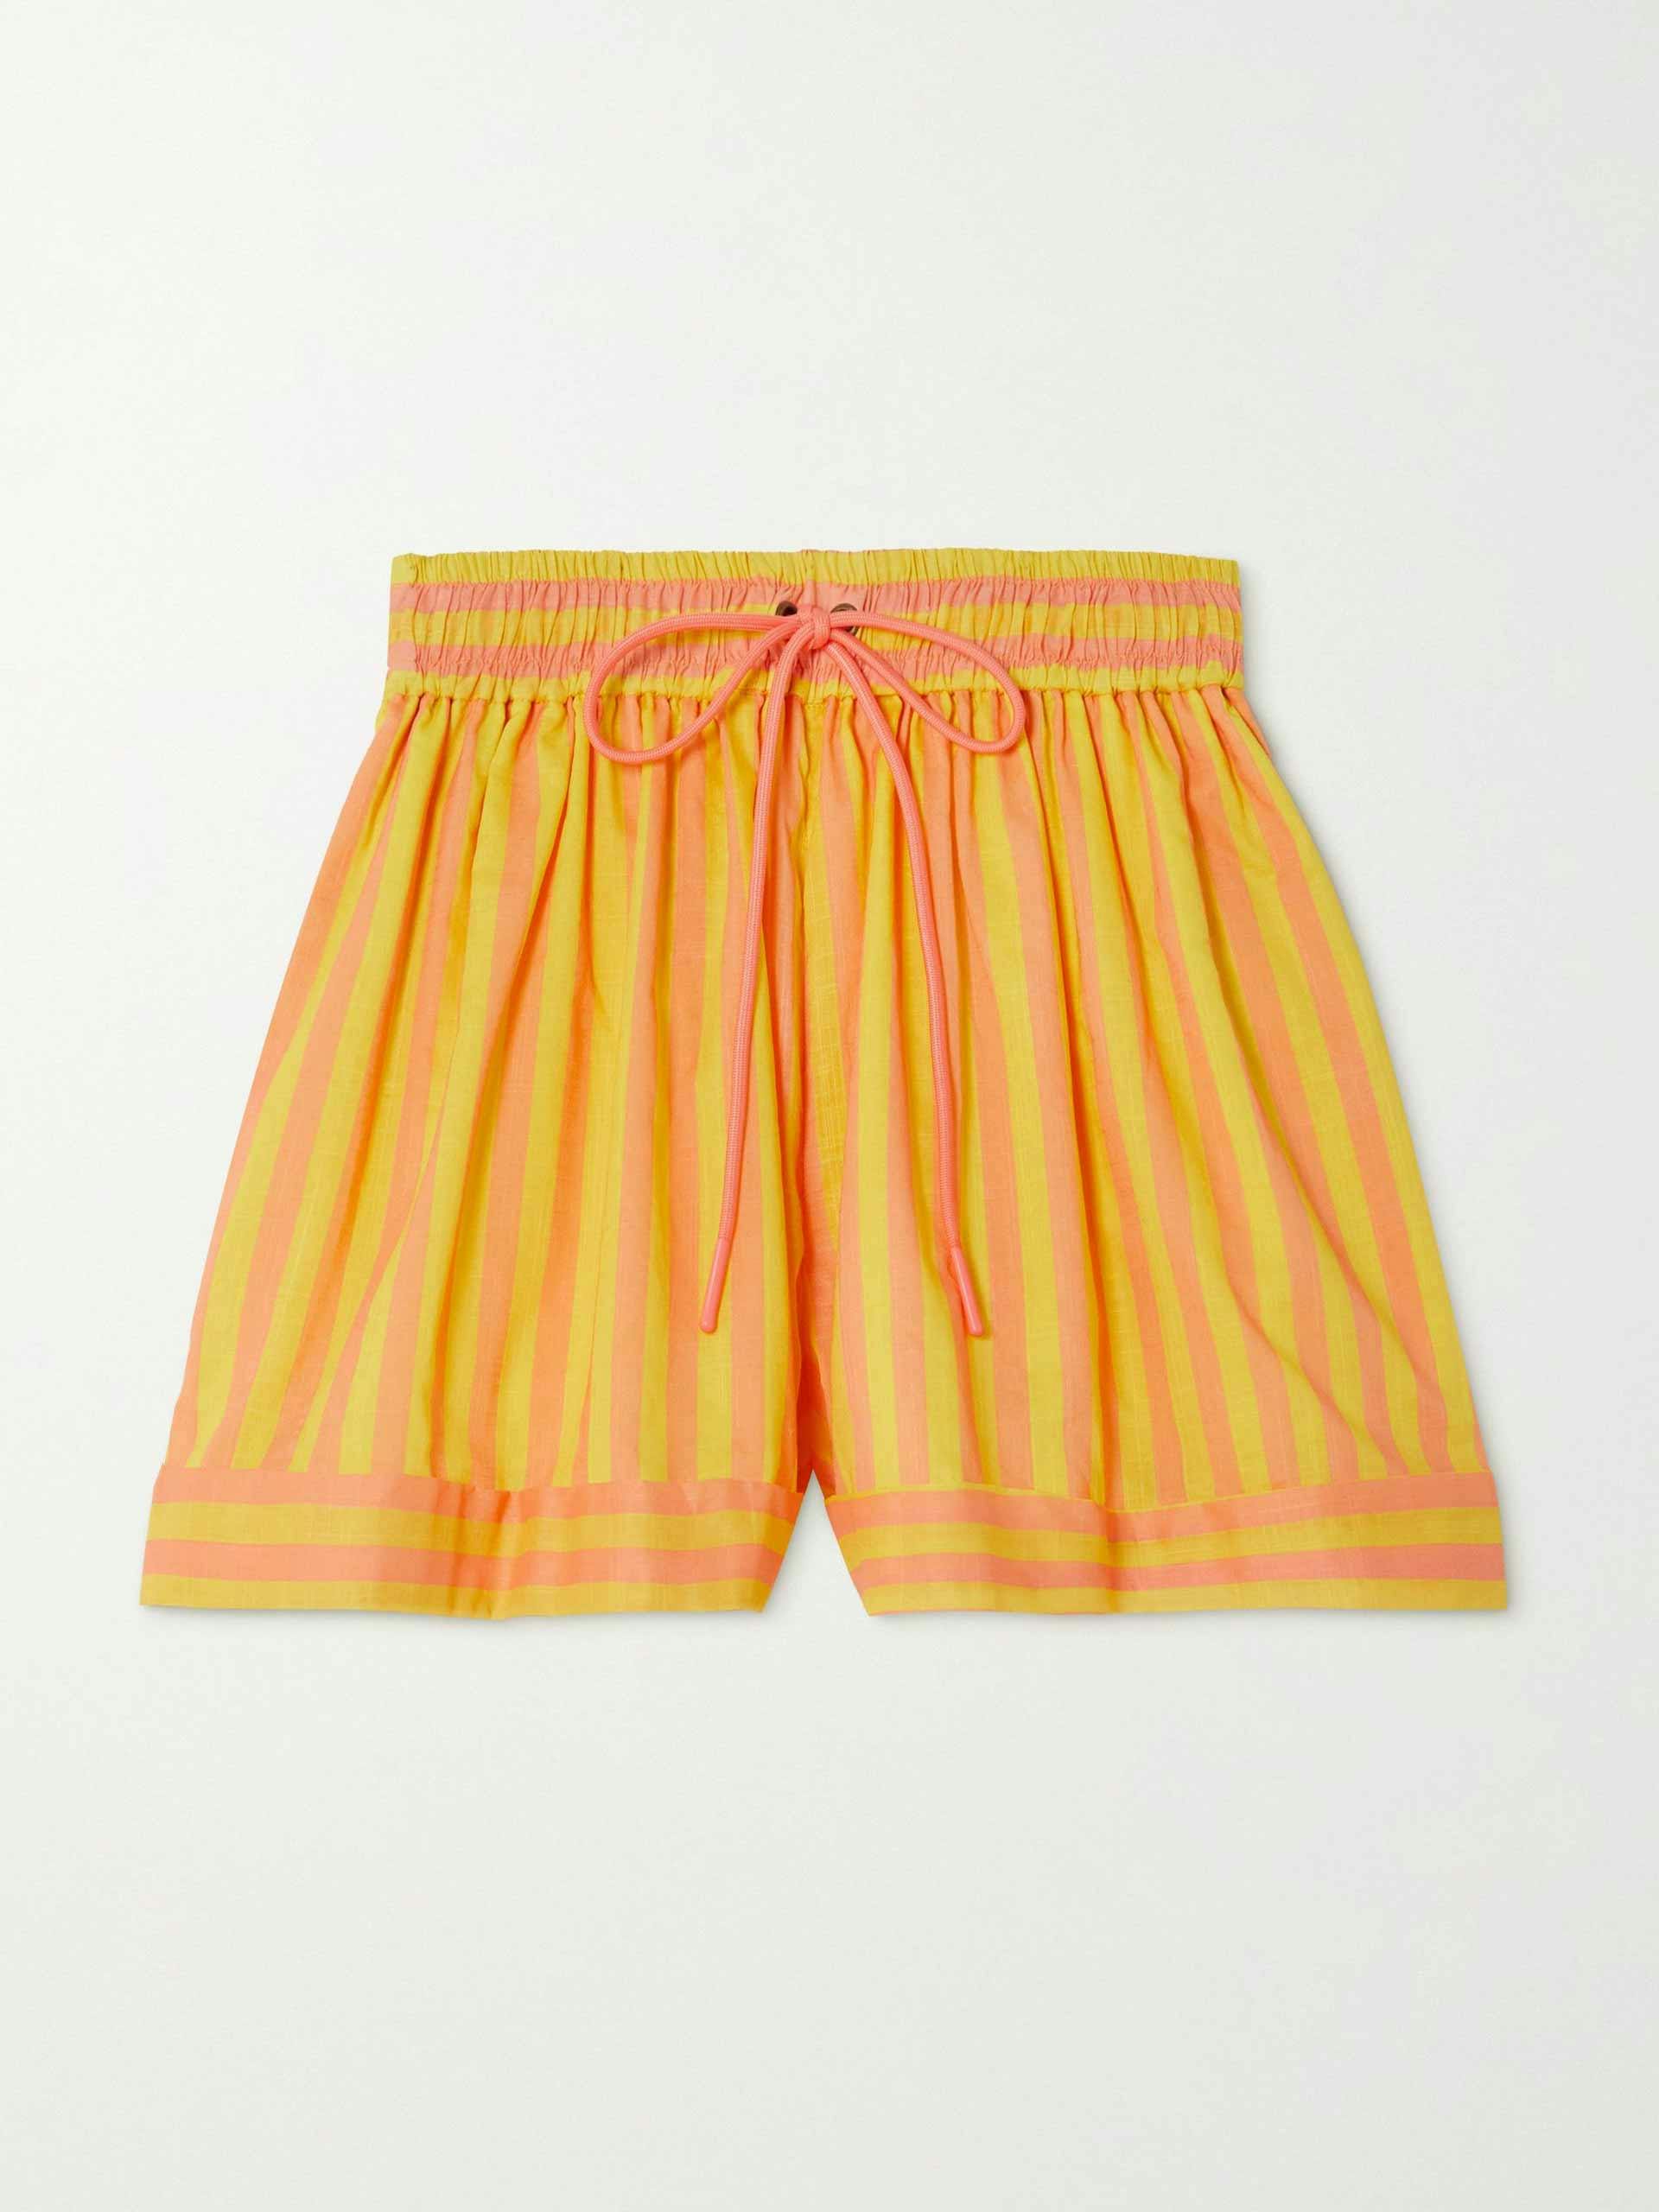 Orange and pink striped shorts